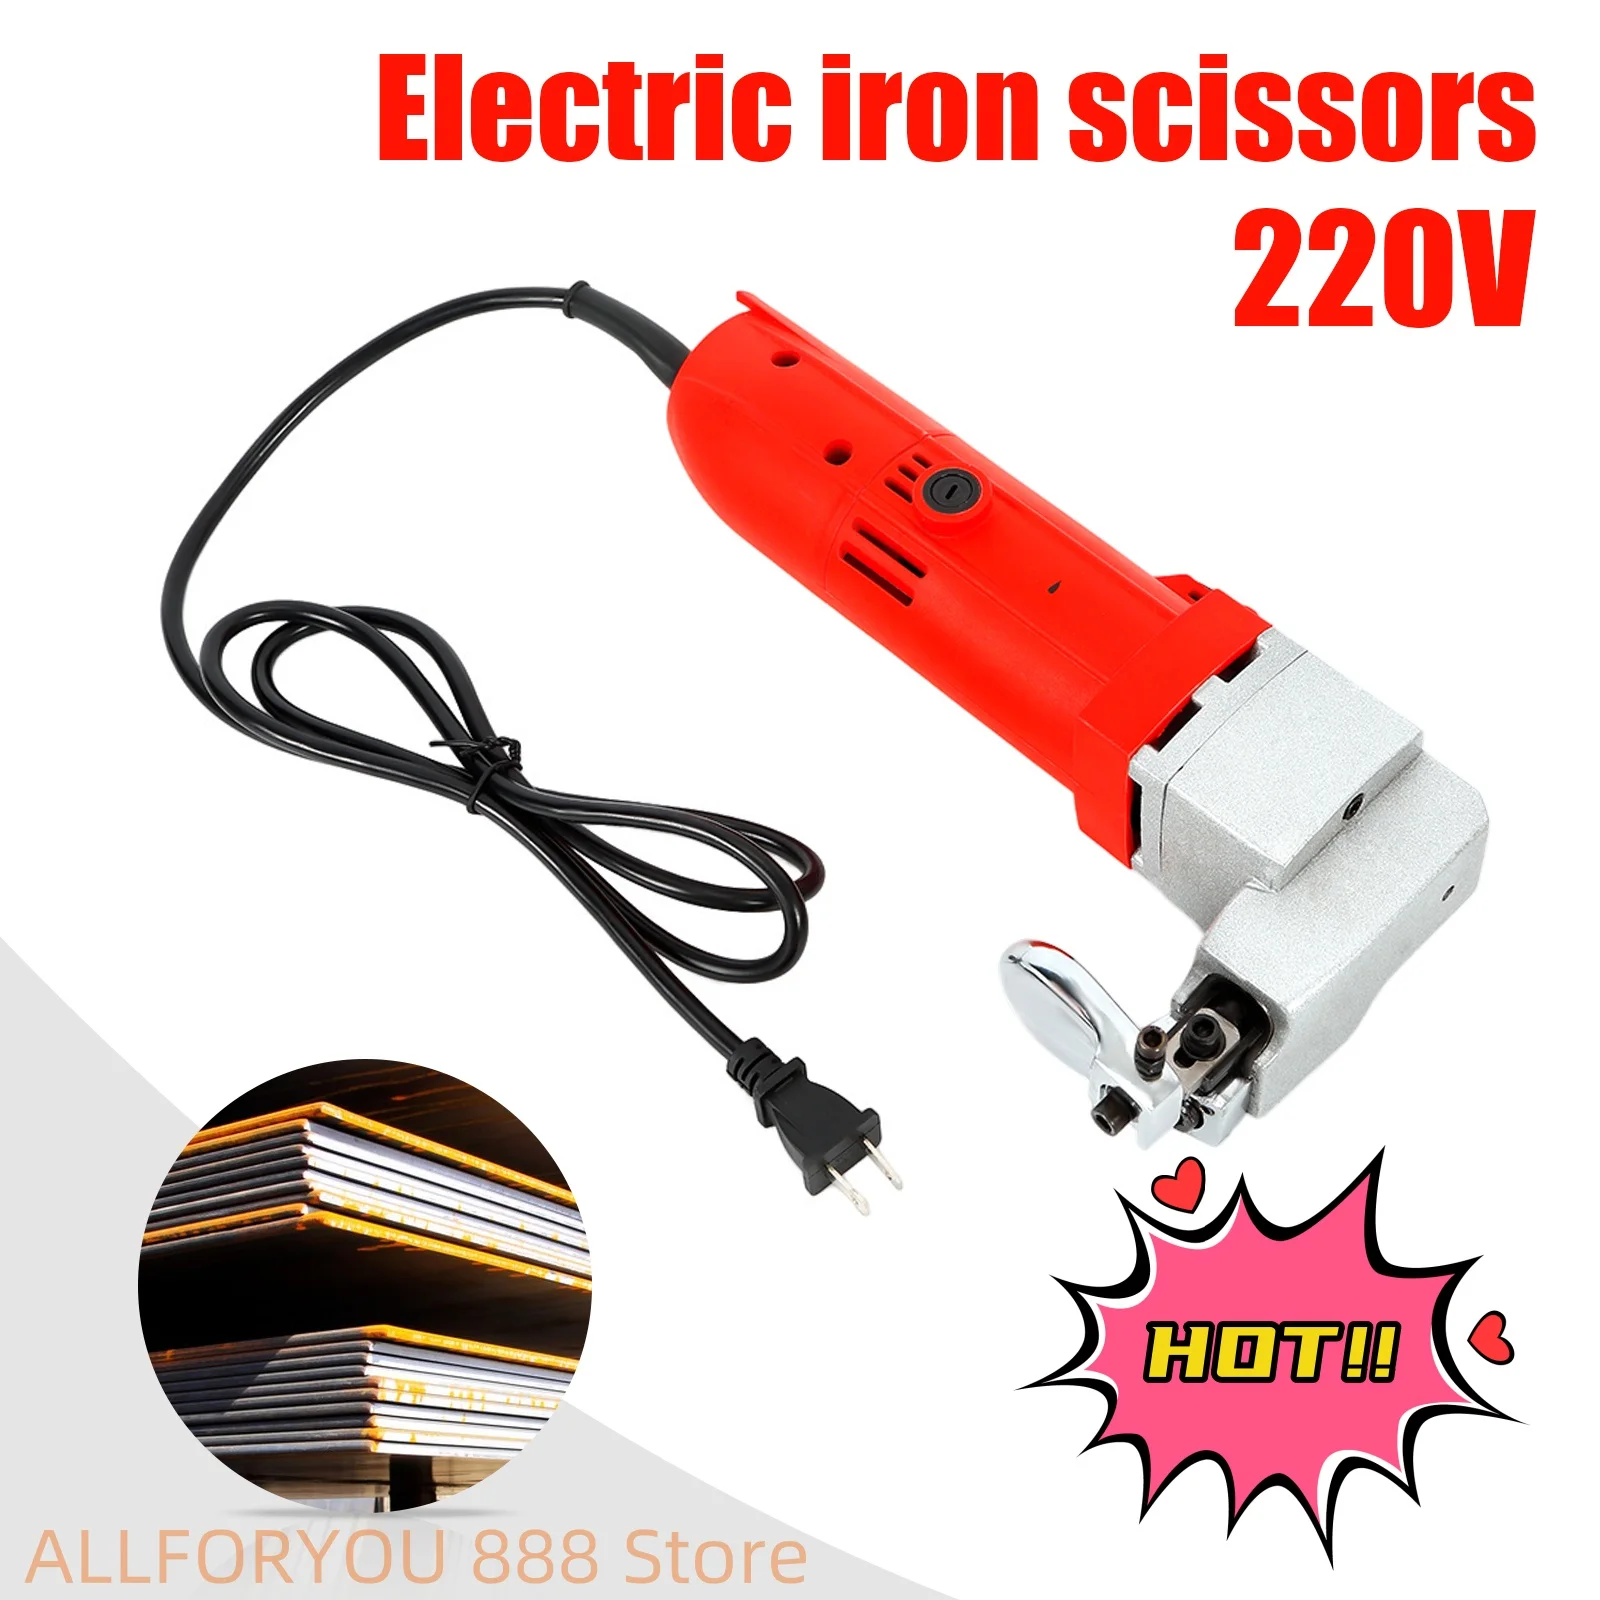 220V 500W Electric Metal Cutting Shears Sheet Shear Cutter With Full Copper Core Motor Cutting Thickness 2.5mm car blank key with graduation scale lineation for nissan scale key shear metal blank uncut scale marking key blade 22 nsn14